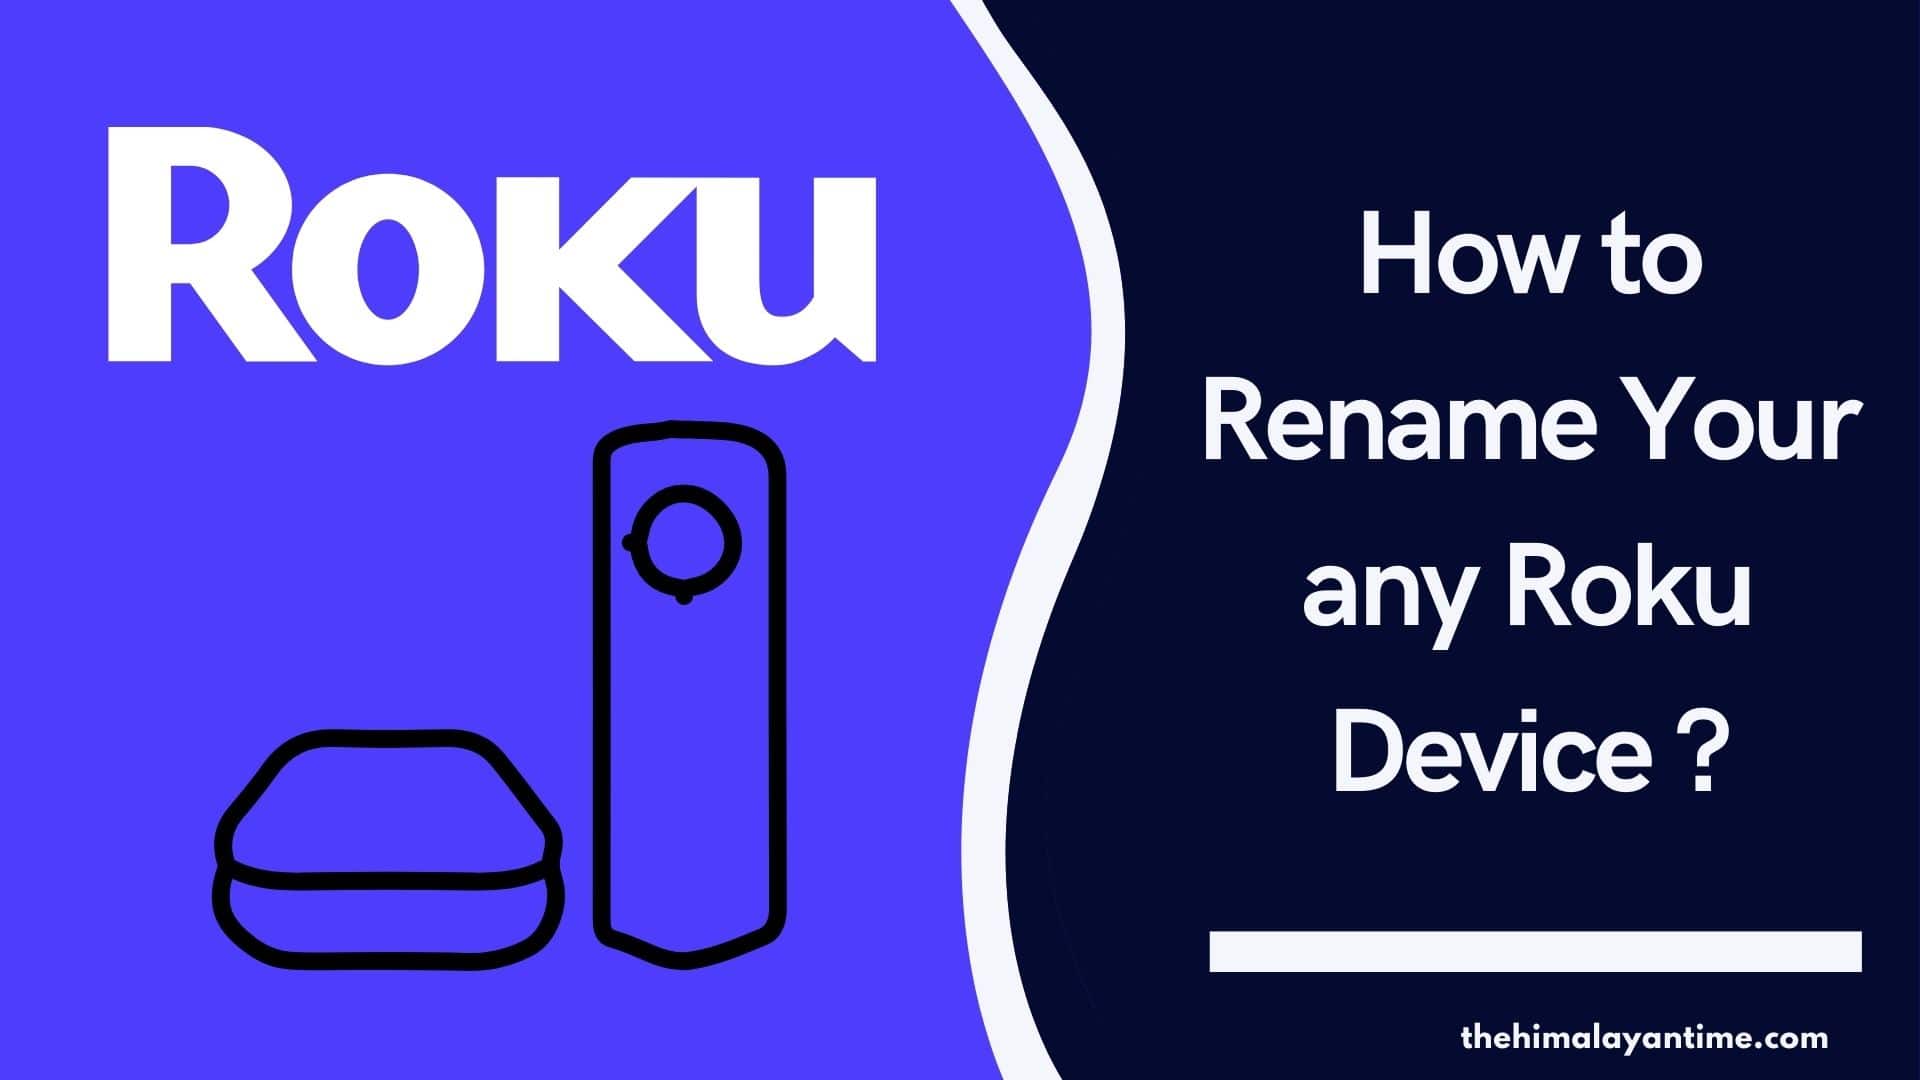 How to Rename Your any Roku Device ?